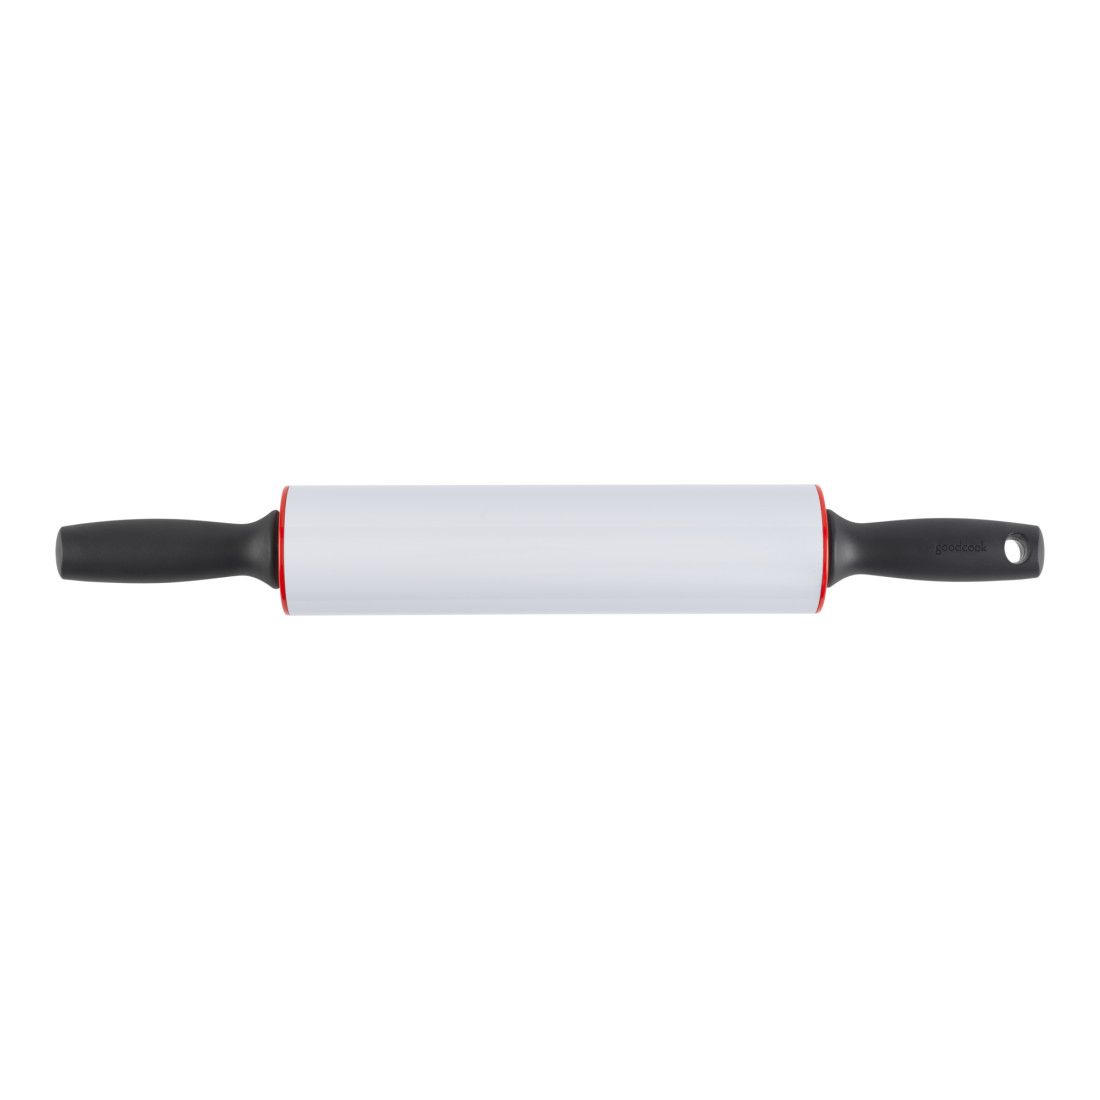 Oxo Rolling Pin  Rolling pin, Rolls, Make it simple